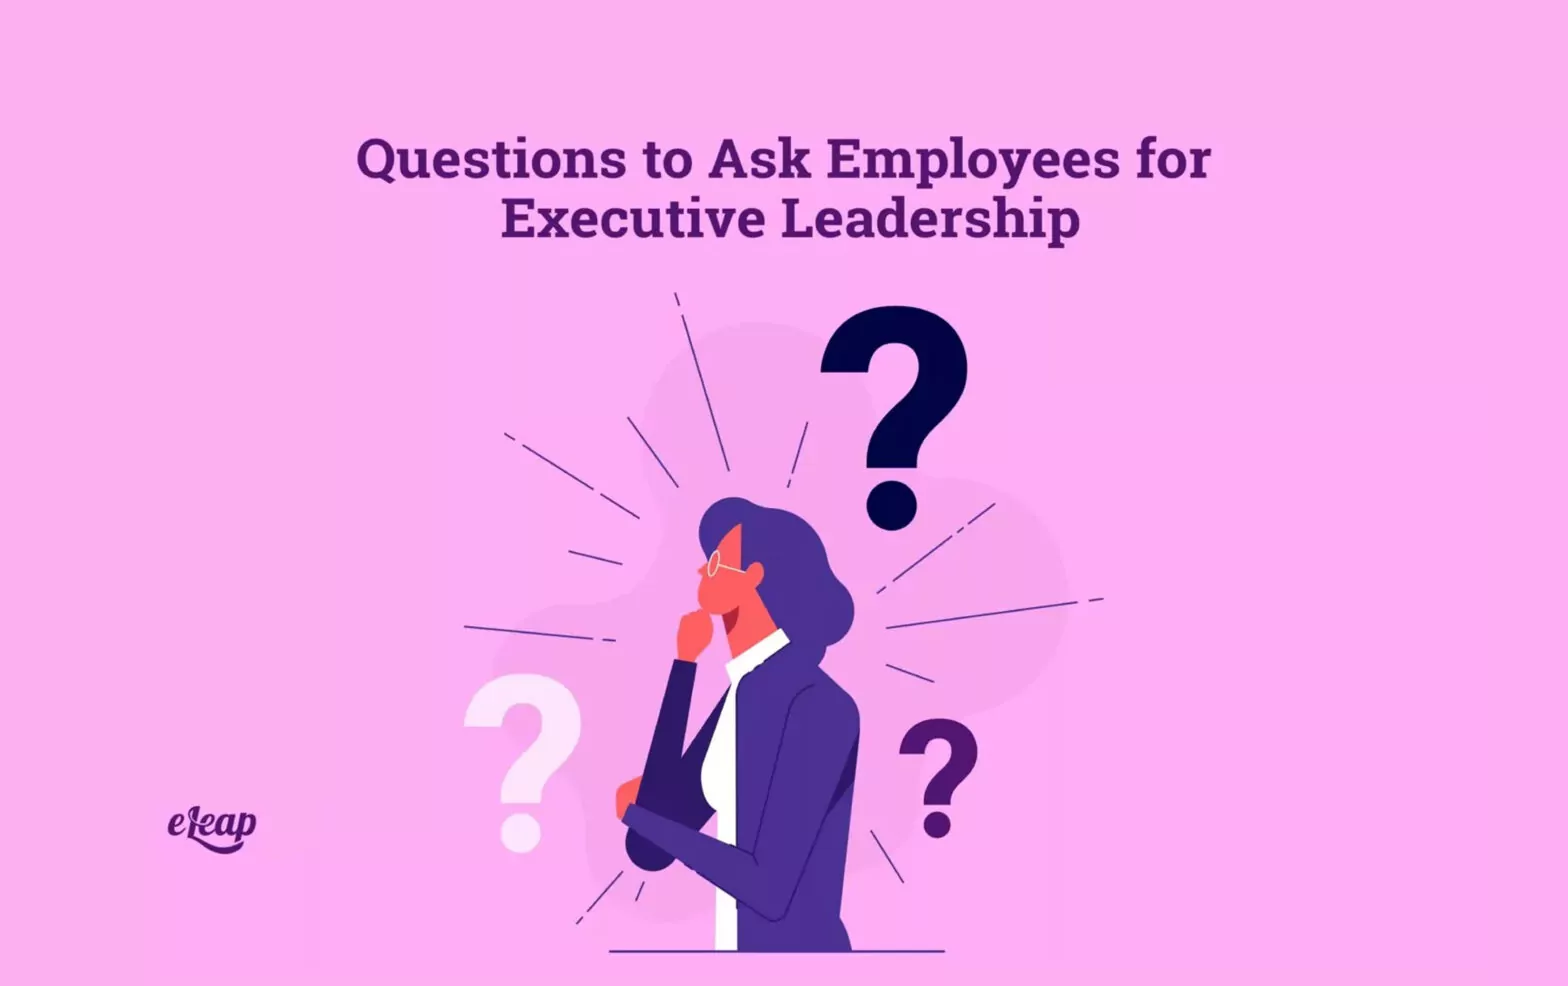 Questions to Ask Employees for Executive Leadership